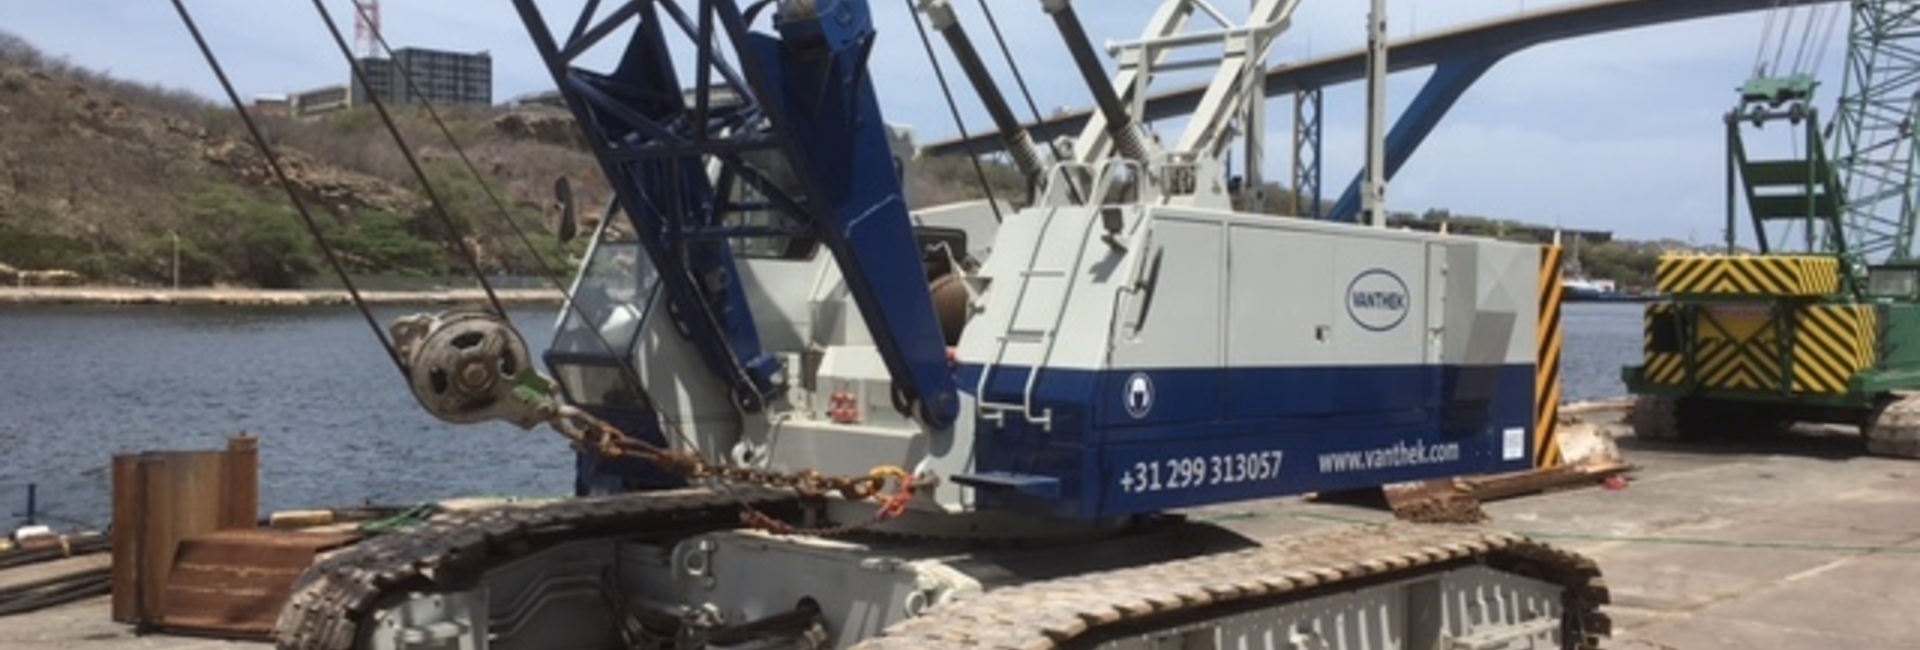 used piling and drilling rigs for sale